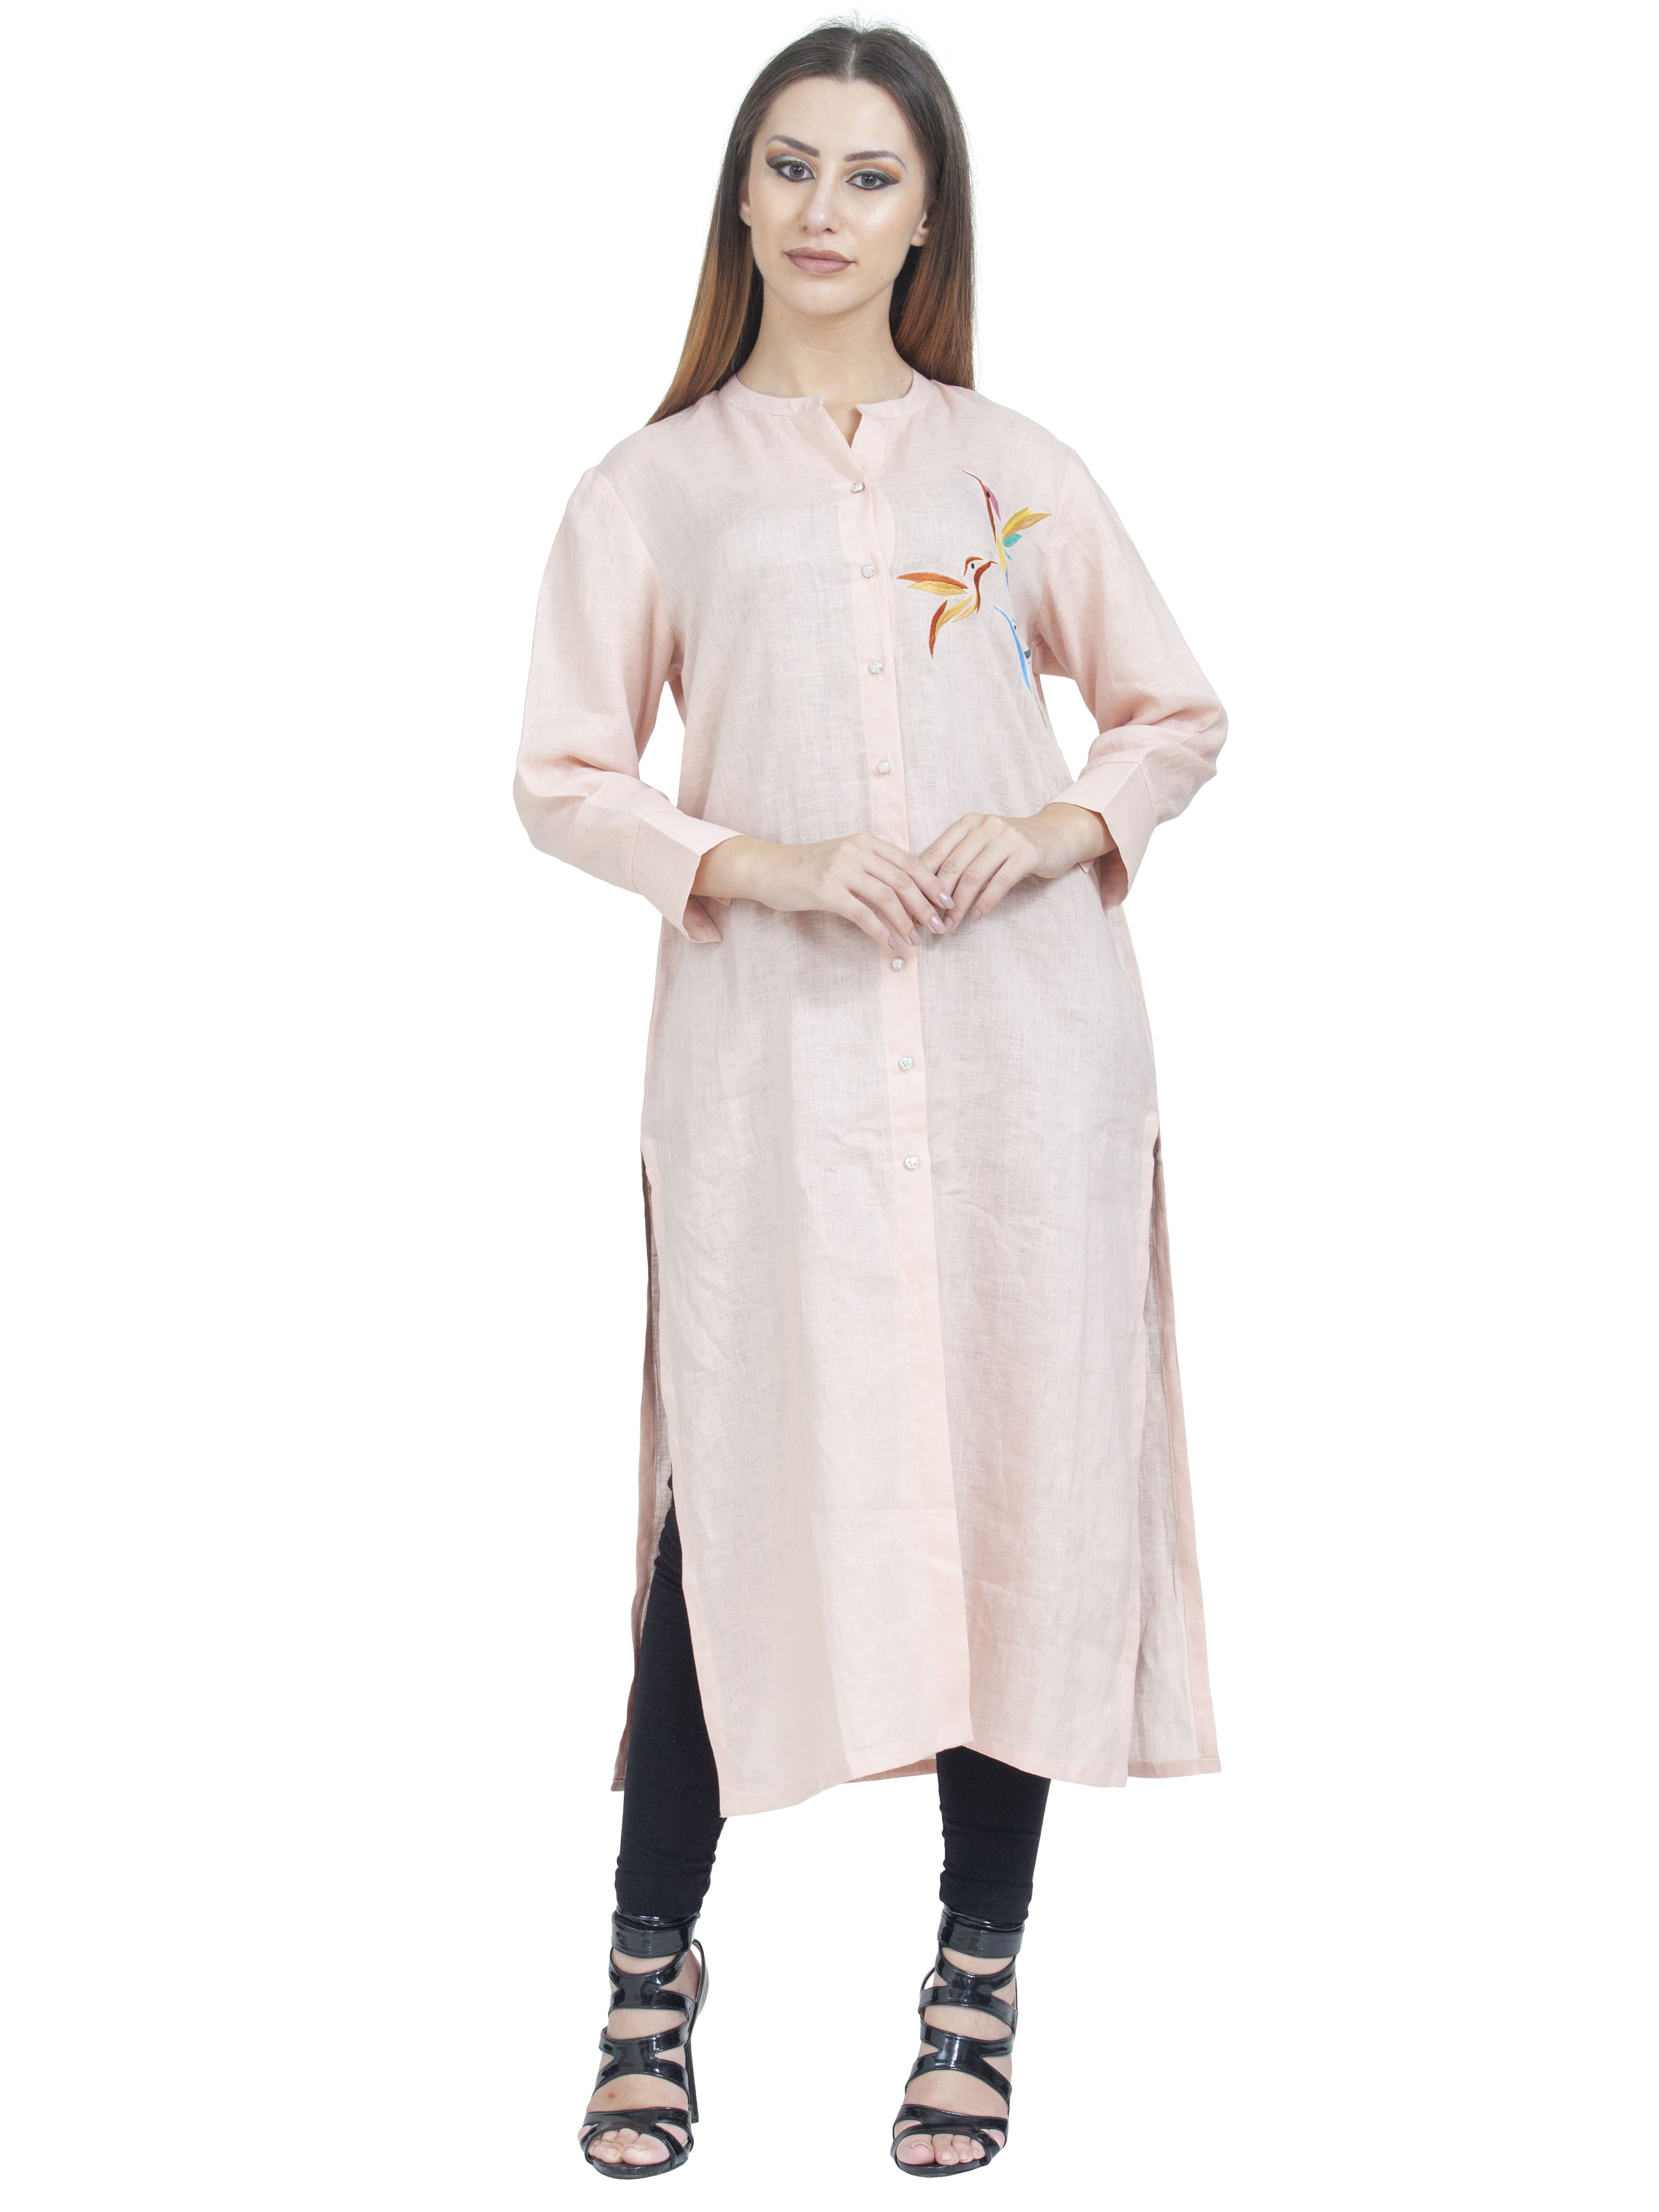 Cotton Clothes Manufacturers in India